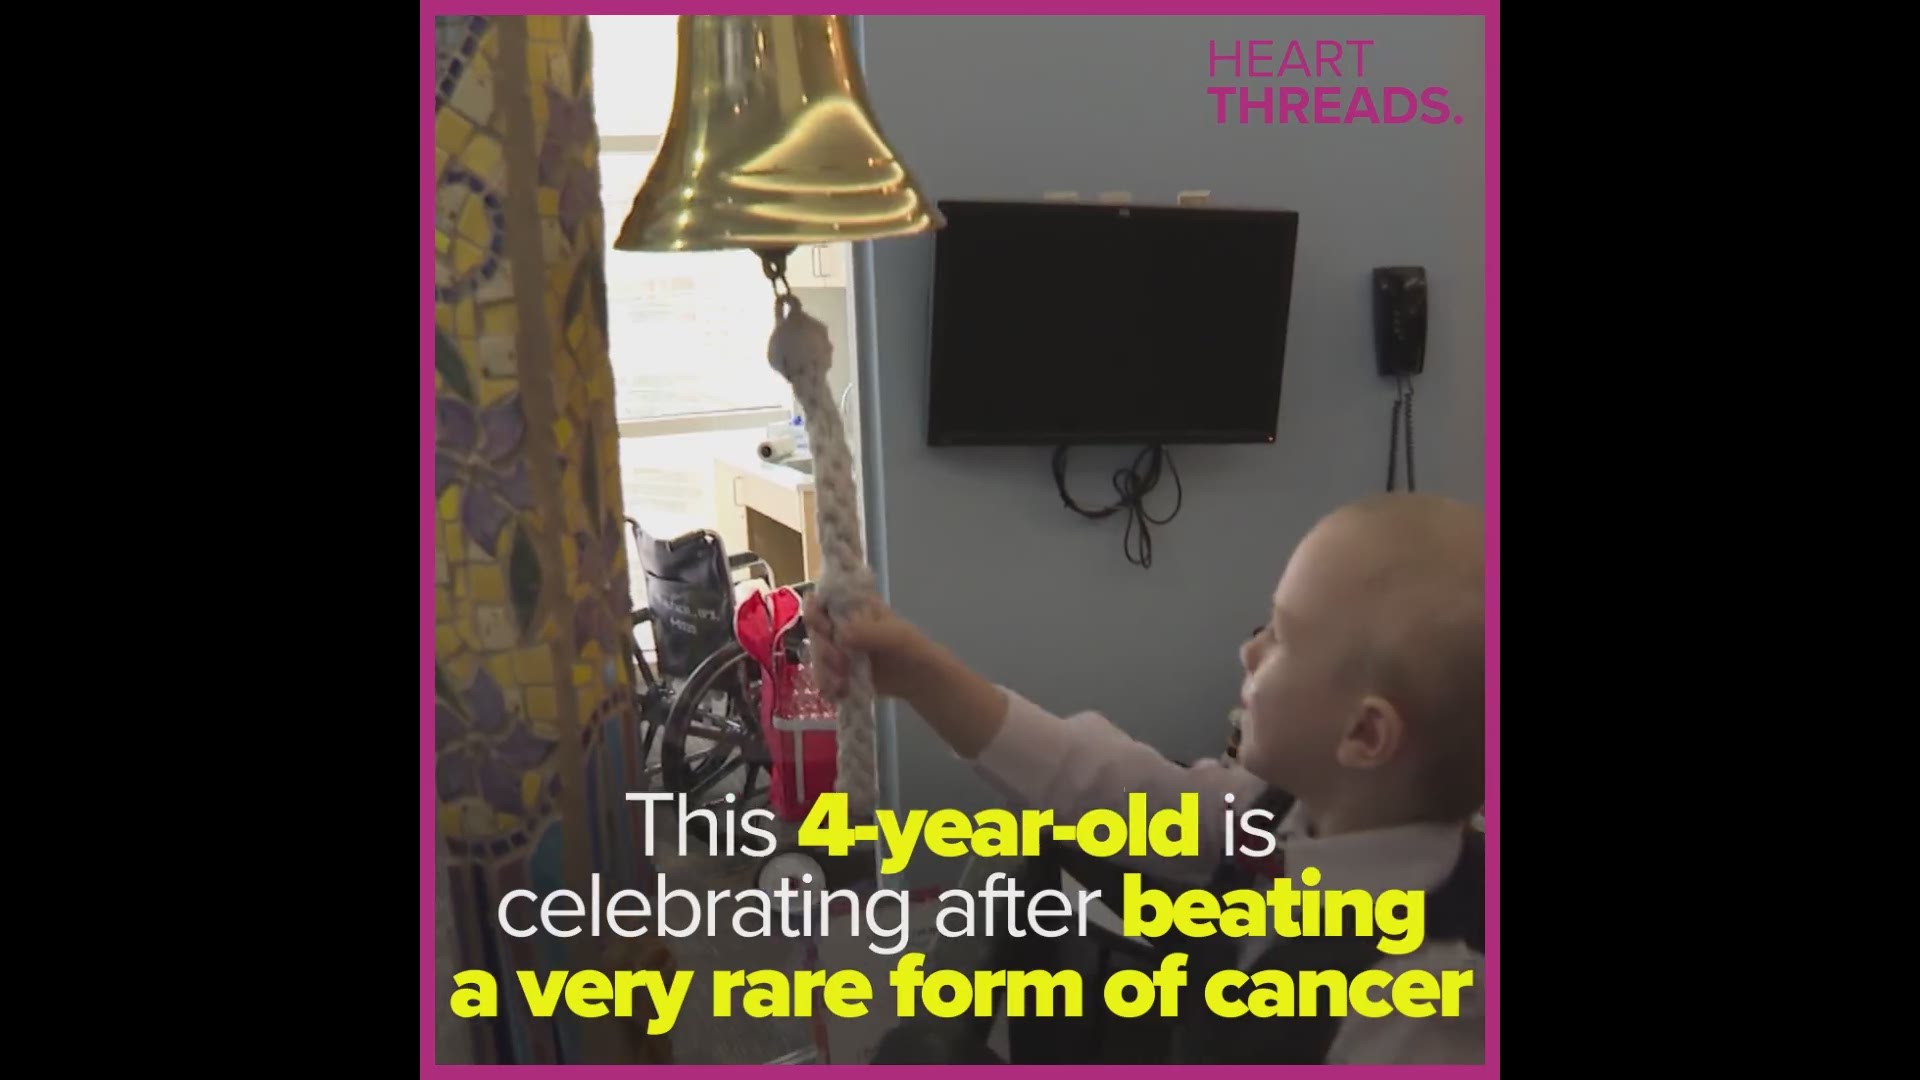 4-year-old Tucker's cancer produced tumors on both his kidneys. But thanks to the efforts of his doctors, Tucker is celebrating being cancer-free.